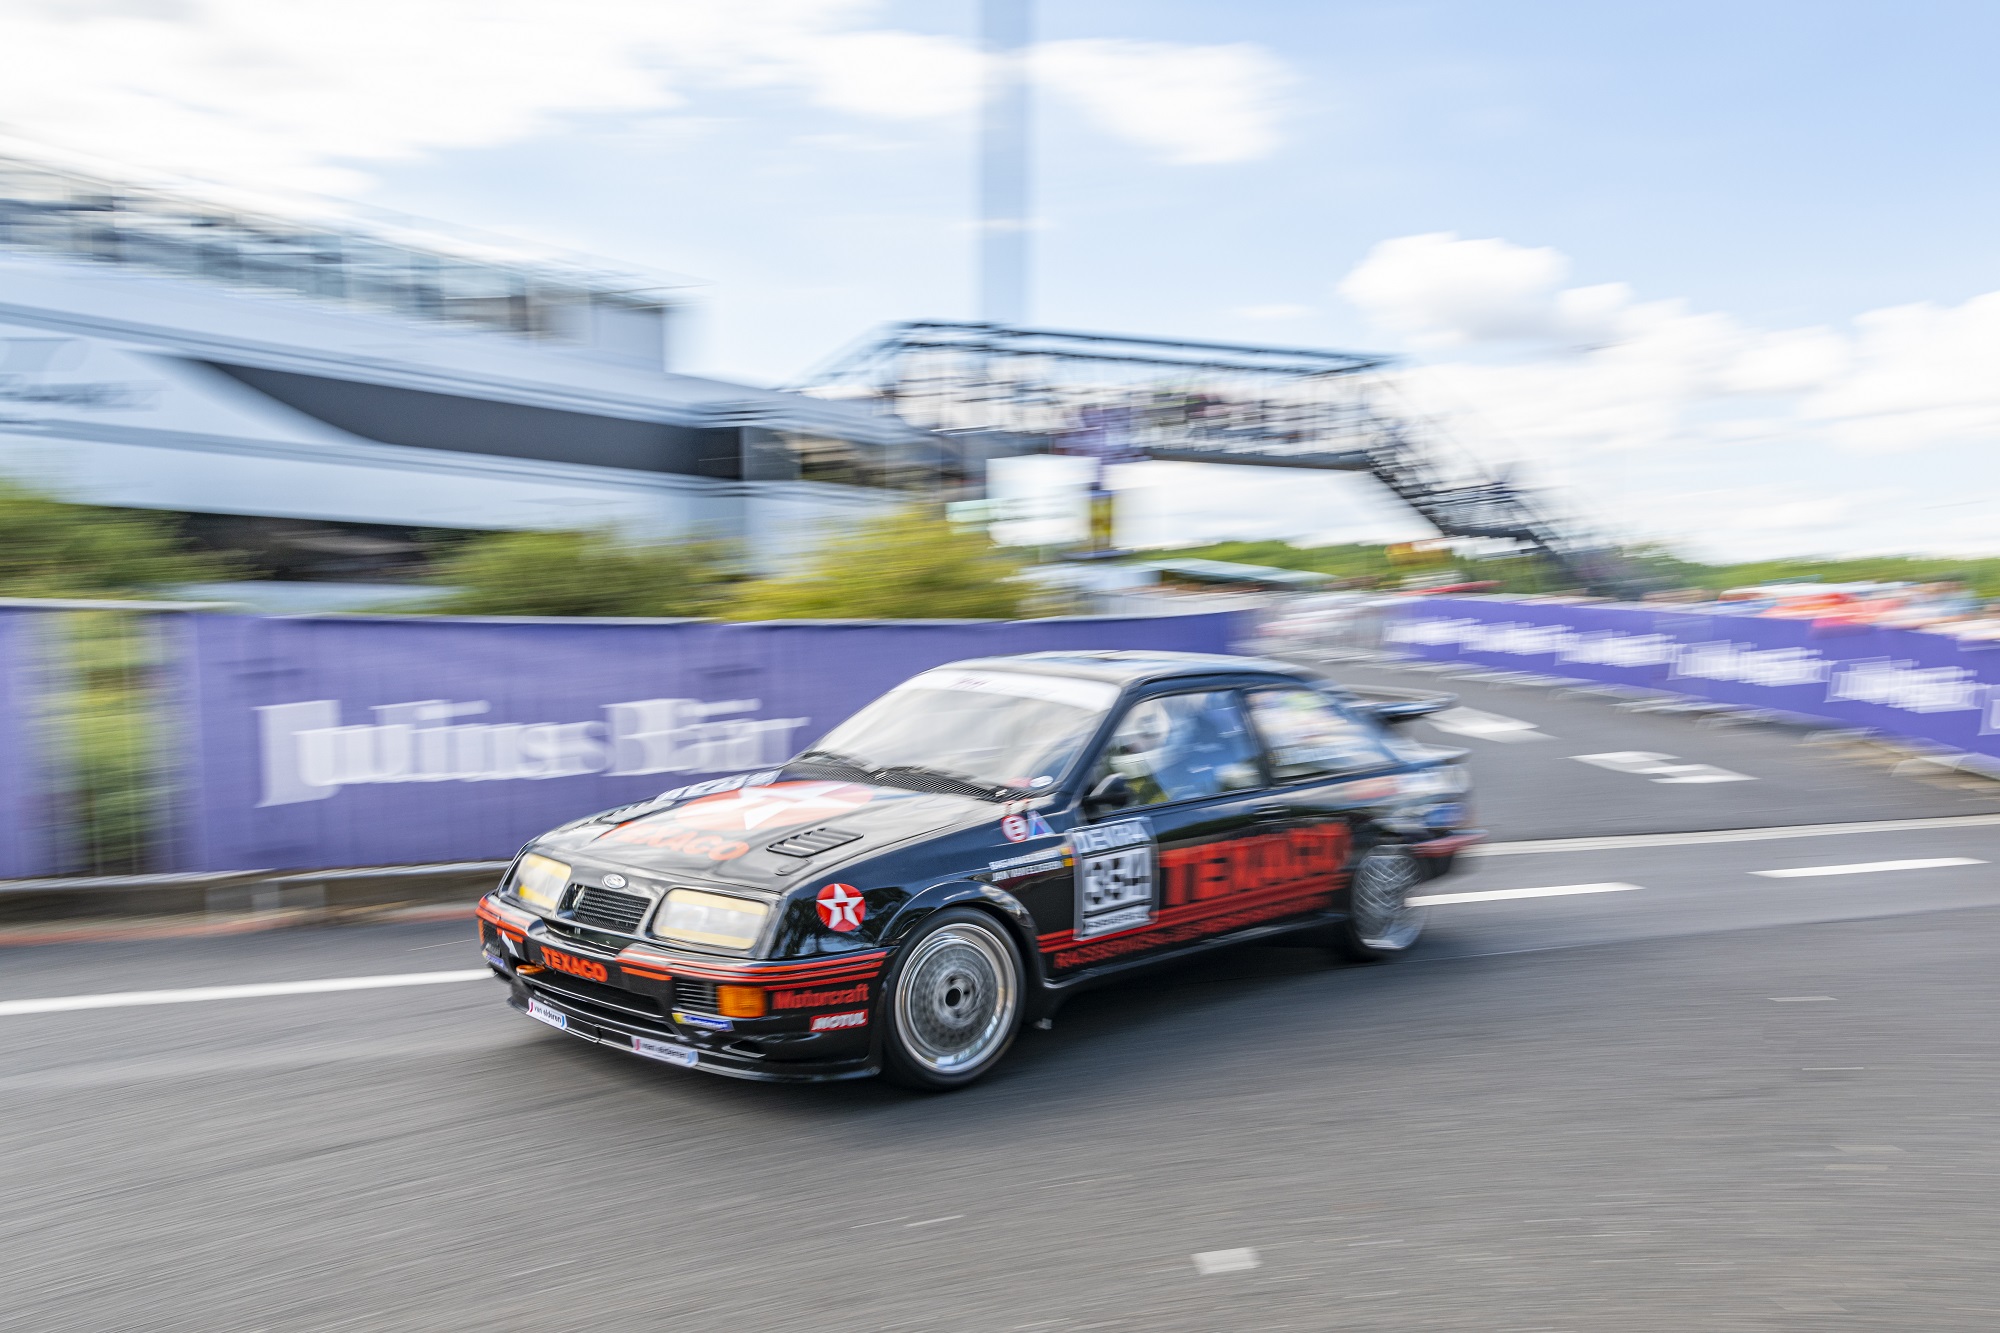 The Ford RS500 Sierra Cosworth looks planted on the track.